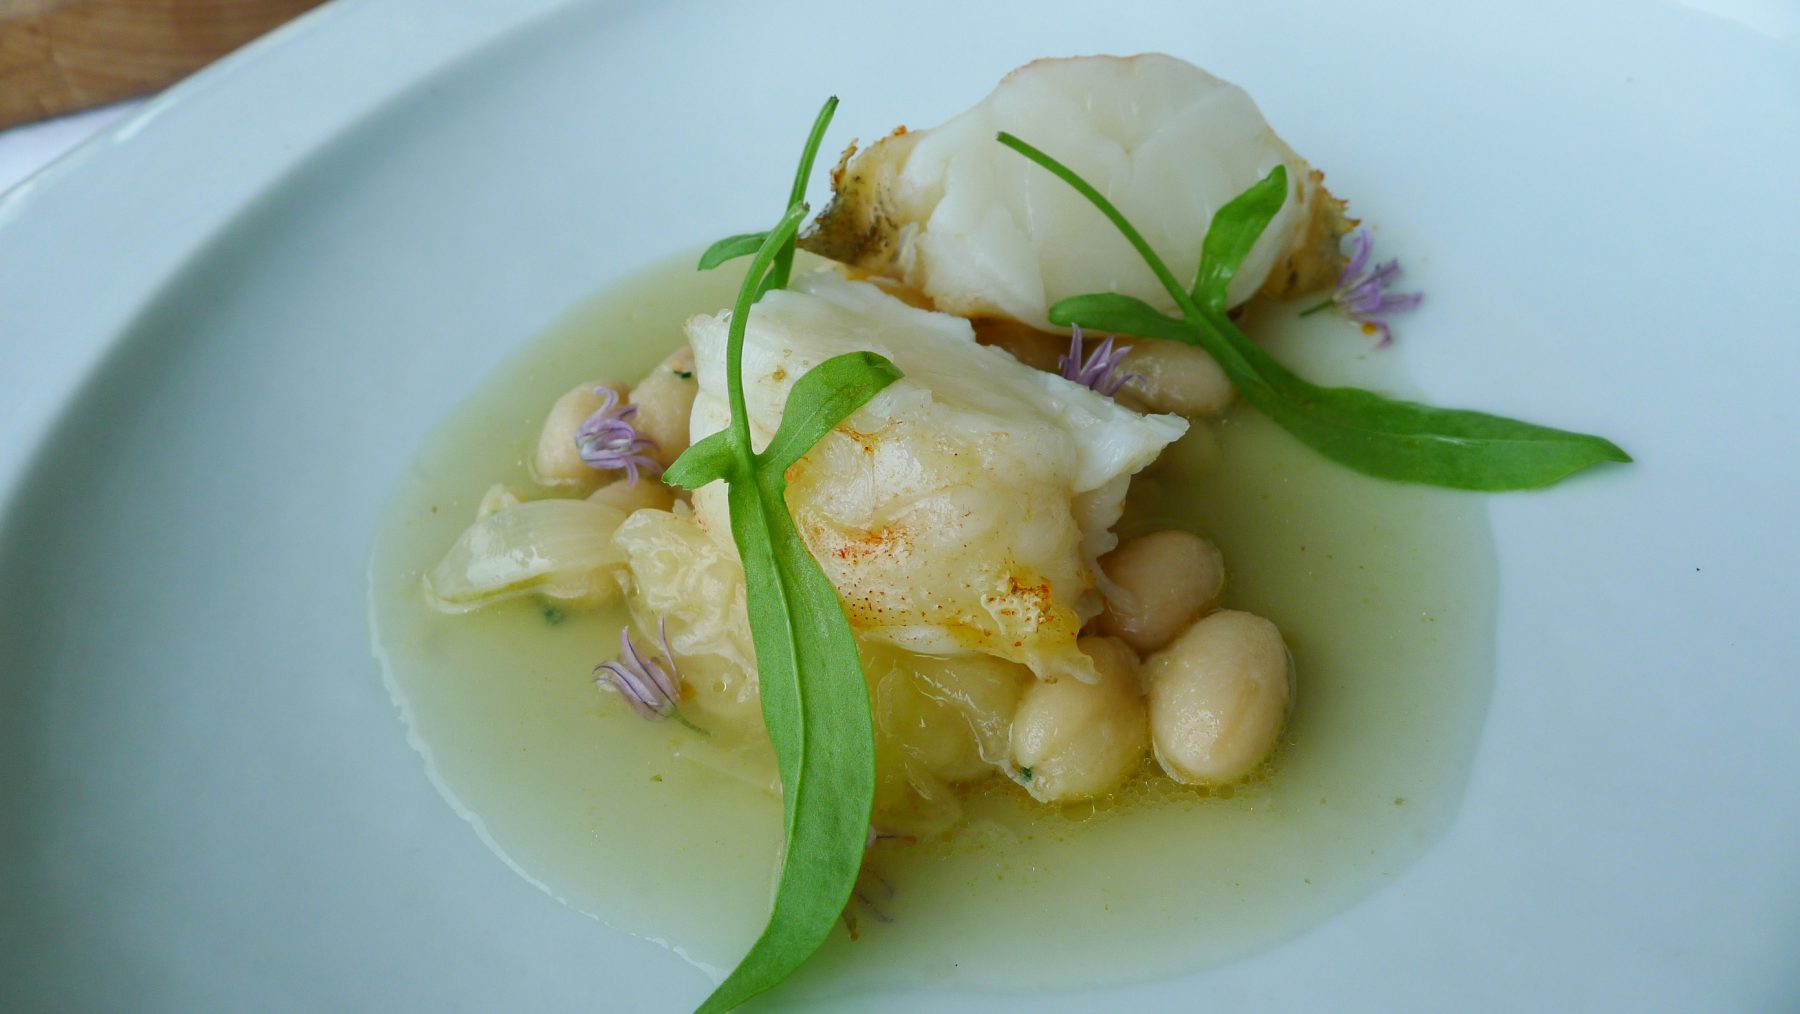 Slipper lobster (cigale de mer) with green beans and camomile juice 